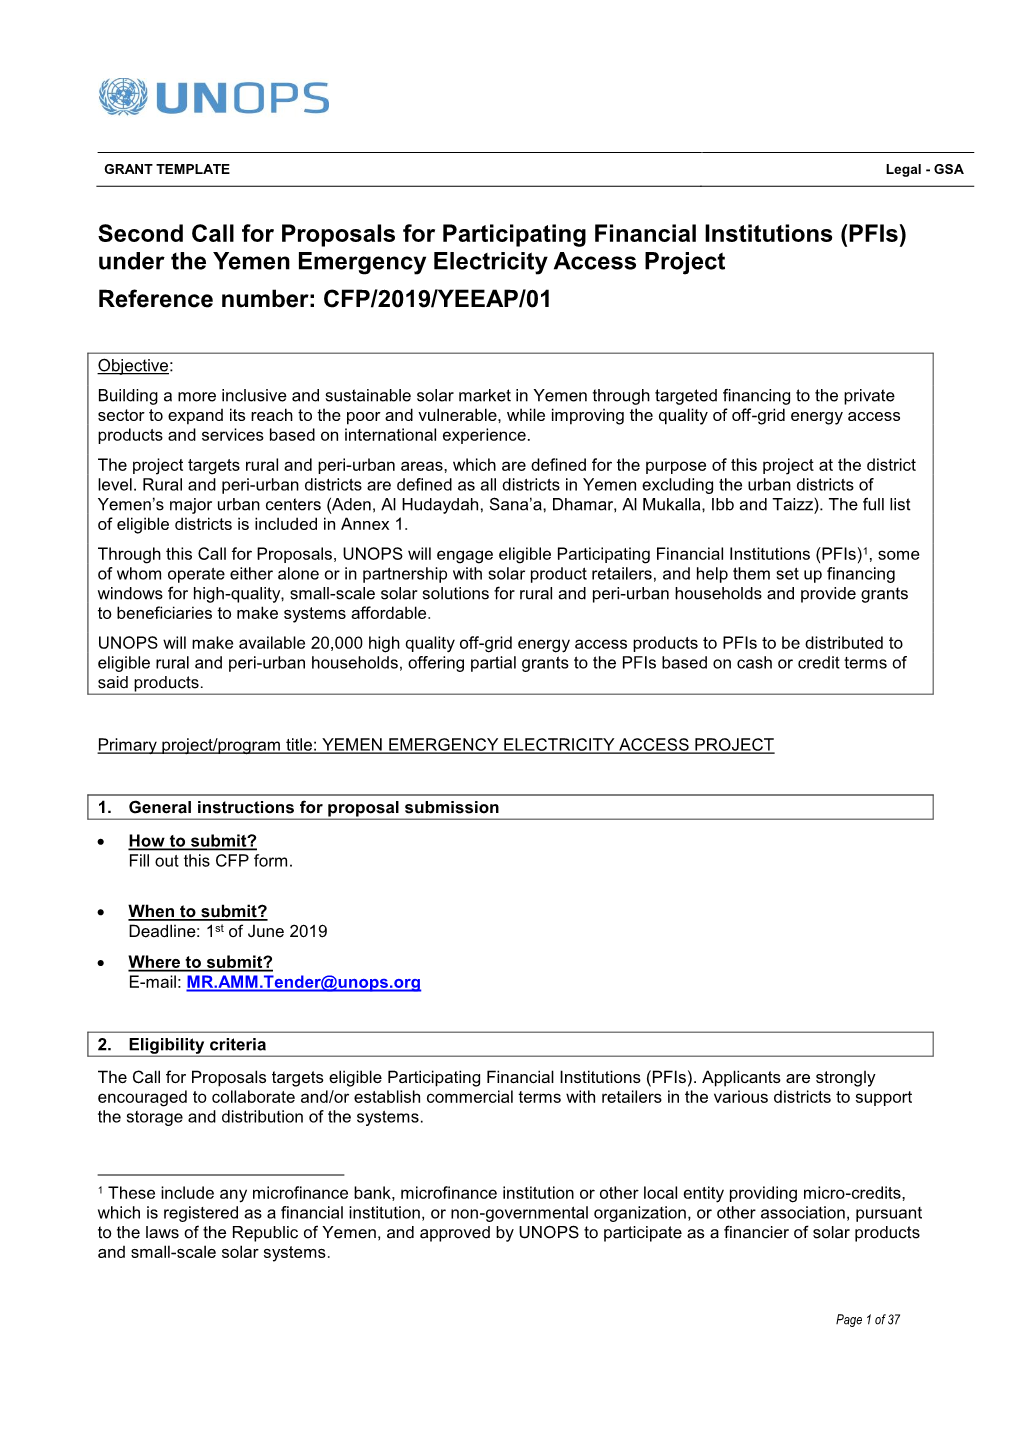 Under the Yemen Emergency Electricity Access Project Reference Number: CFP/2019/YEEAP/01